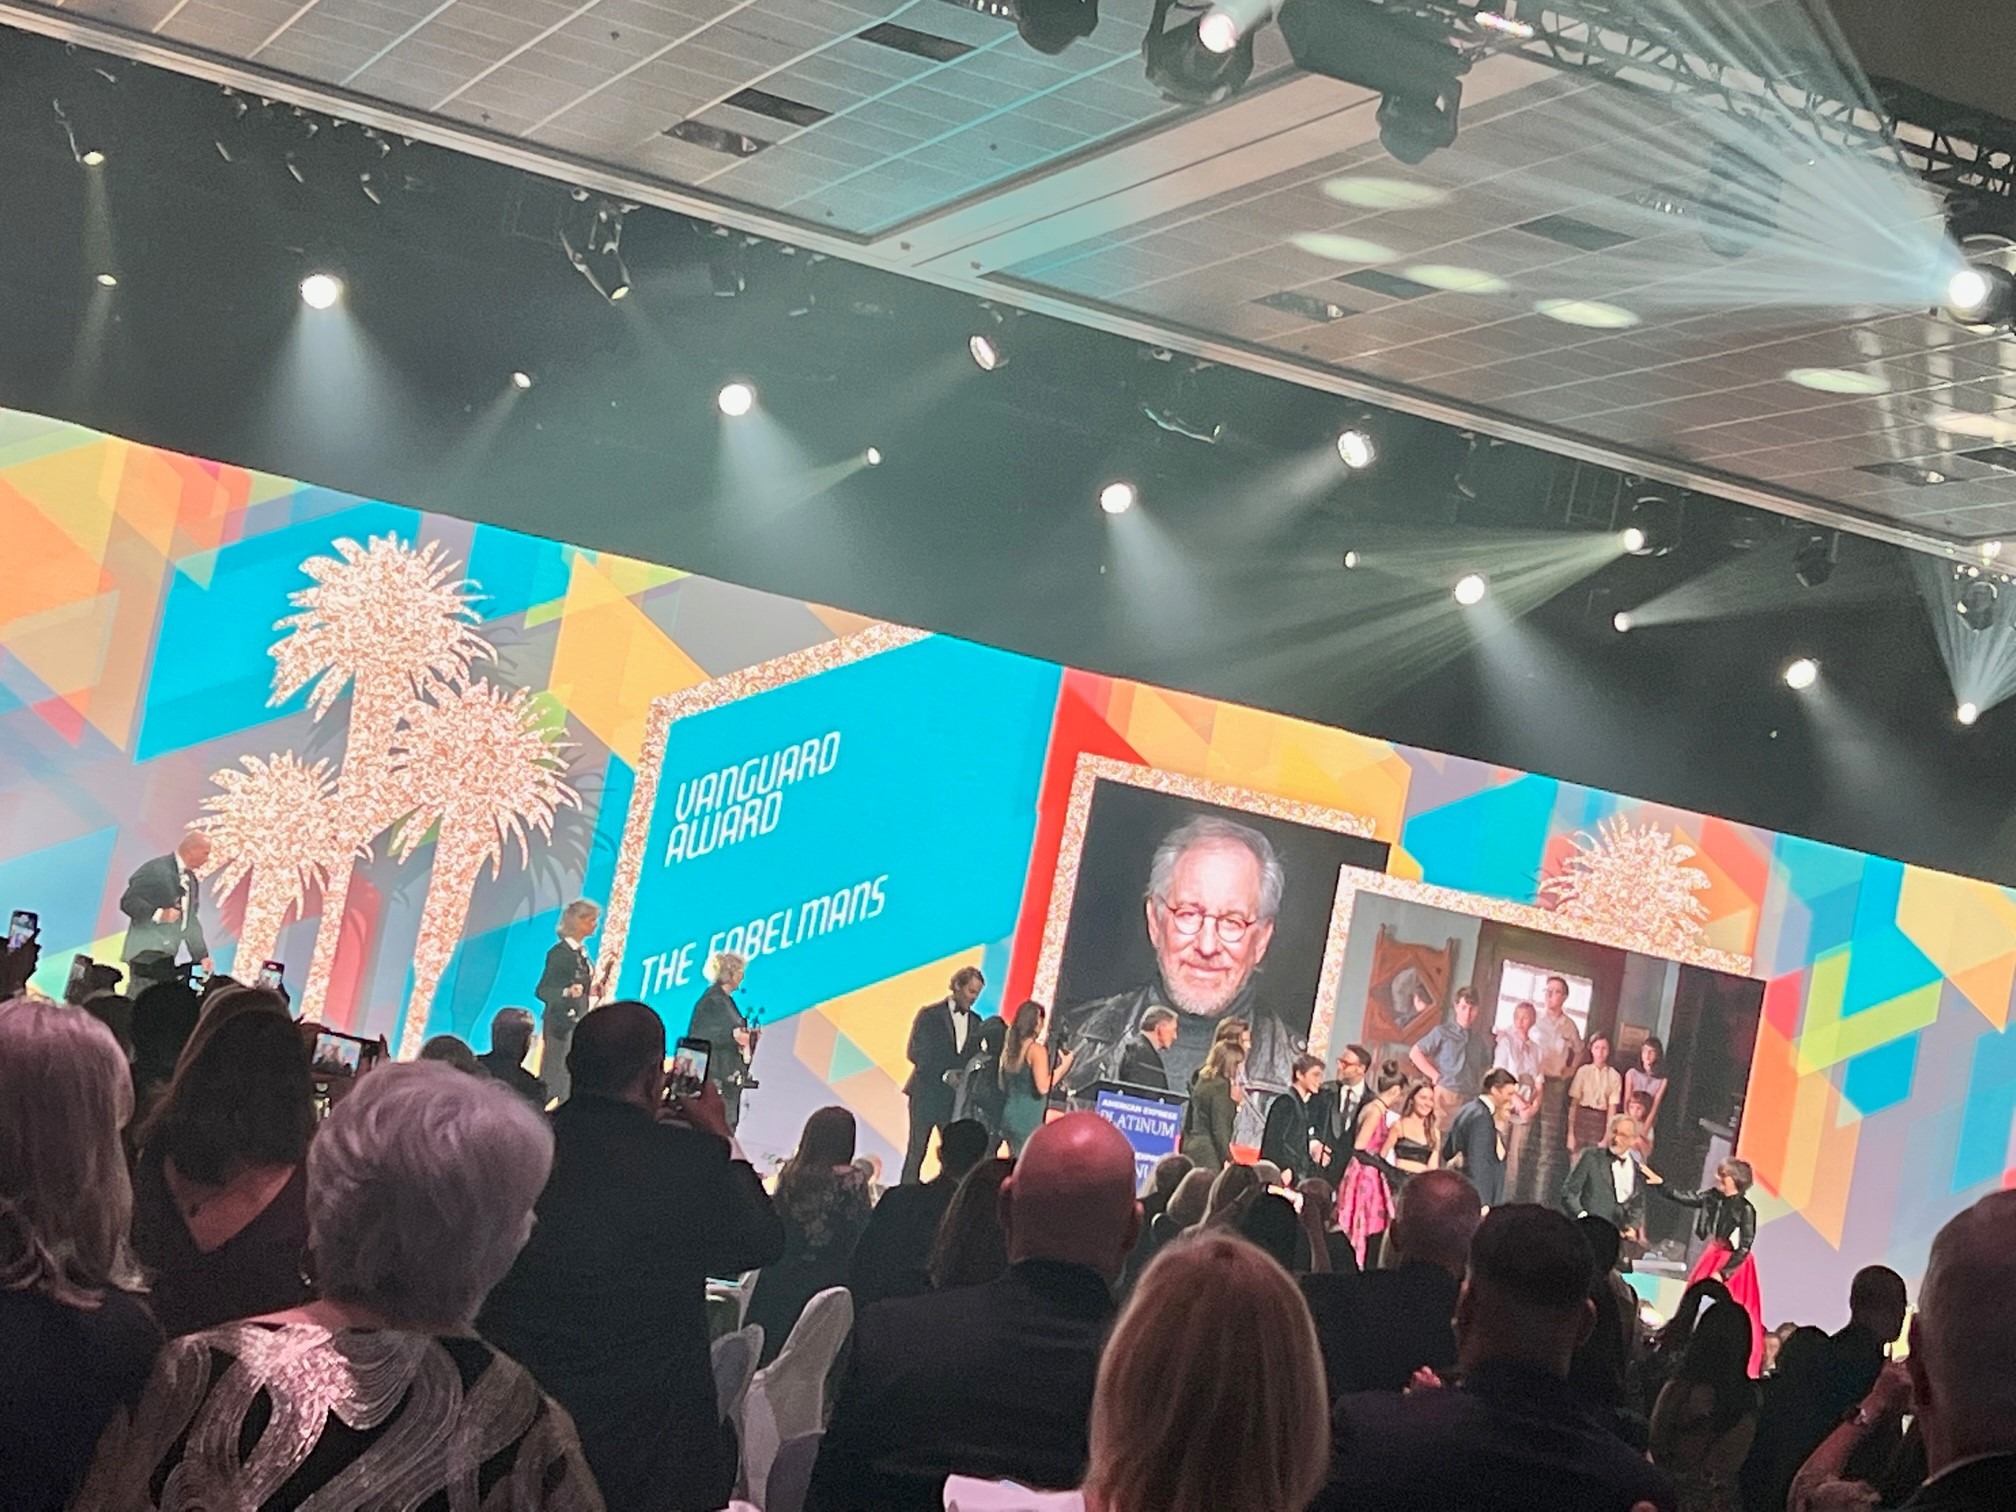 cast on stage at the vanguard awards in palm springs, california. On screen is an image of steven speilberg and a still shot from his movie, "The Fabelmans"